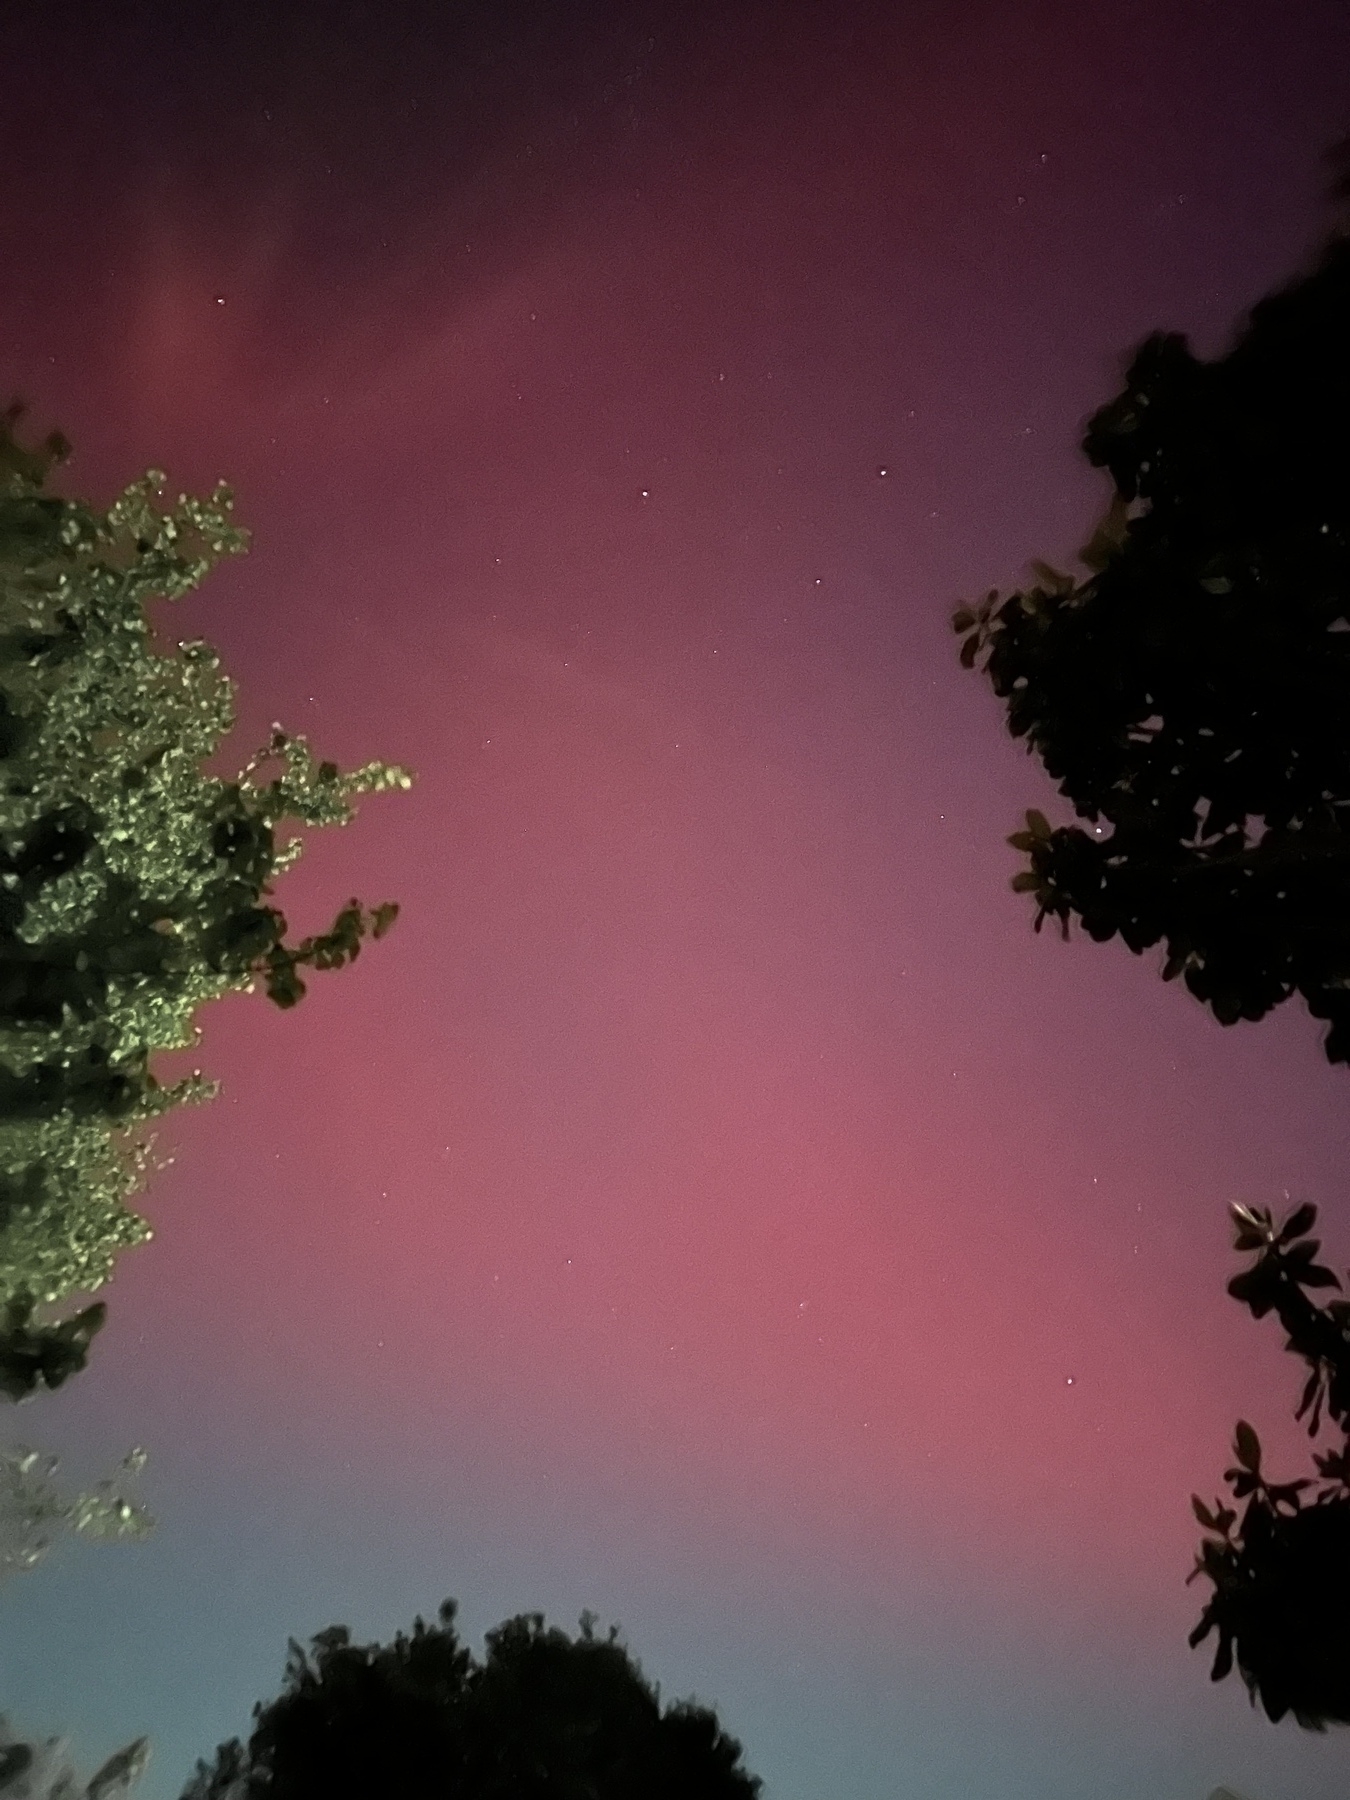 Auto-generated description: A twilight sky showcases a gradient from pink to blue, dotted with stars, and framed by silhouetted tree foliage.